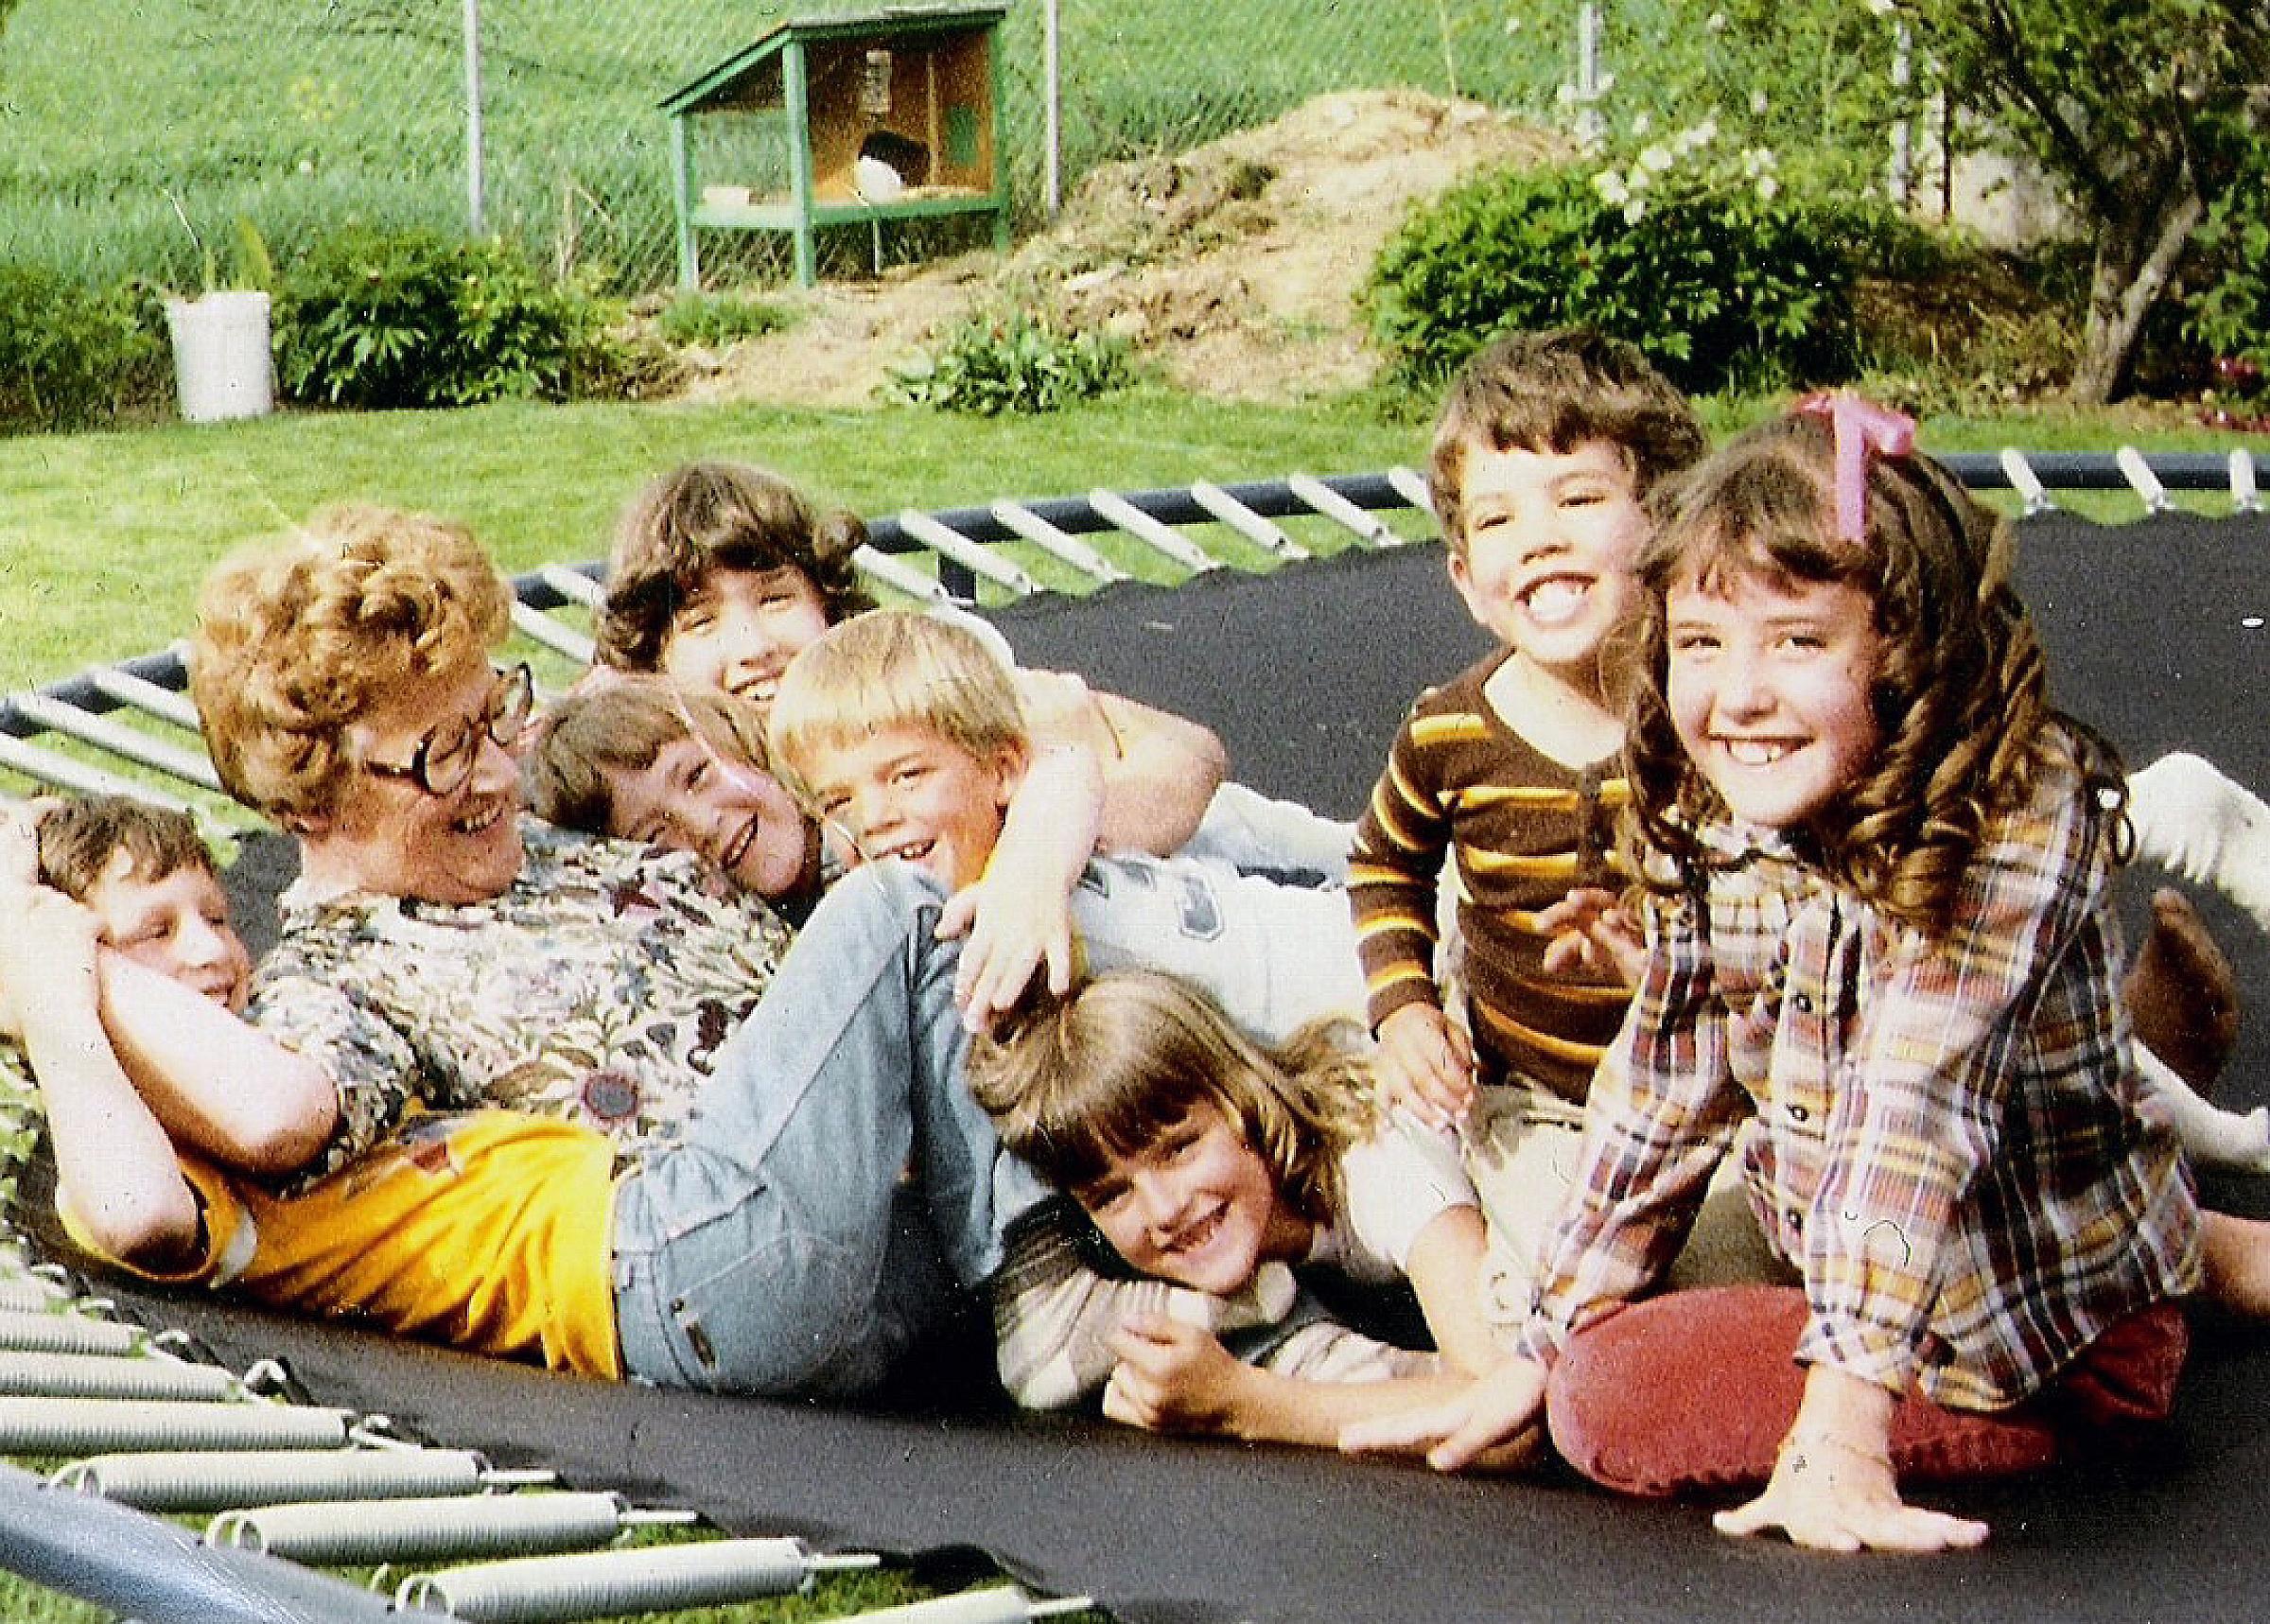 Amy Olsen's grandma with most of her grandkids playing on a trampoline